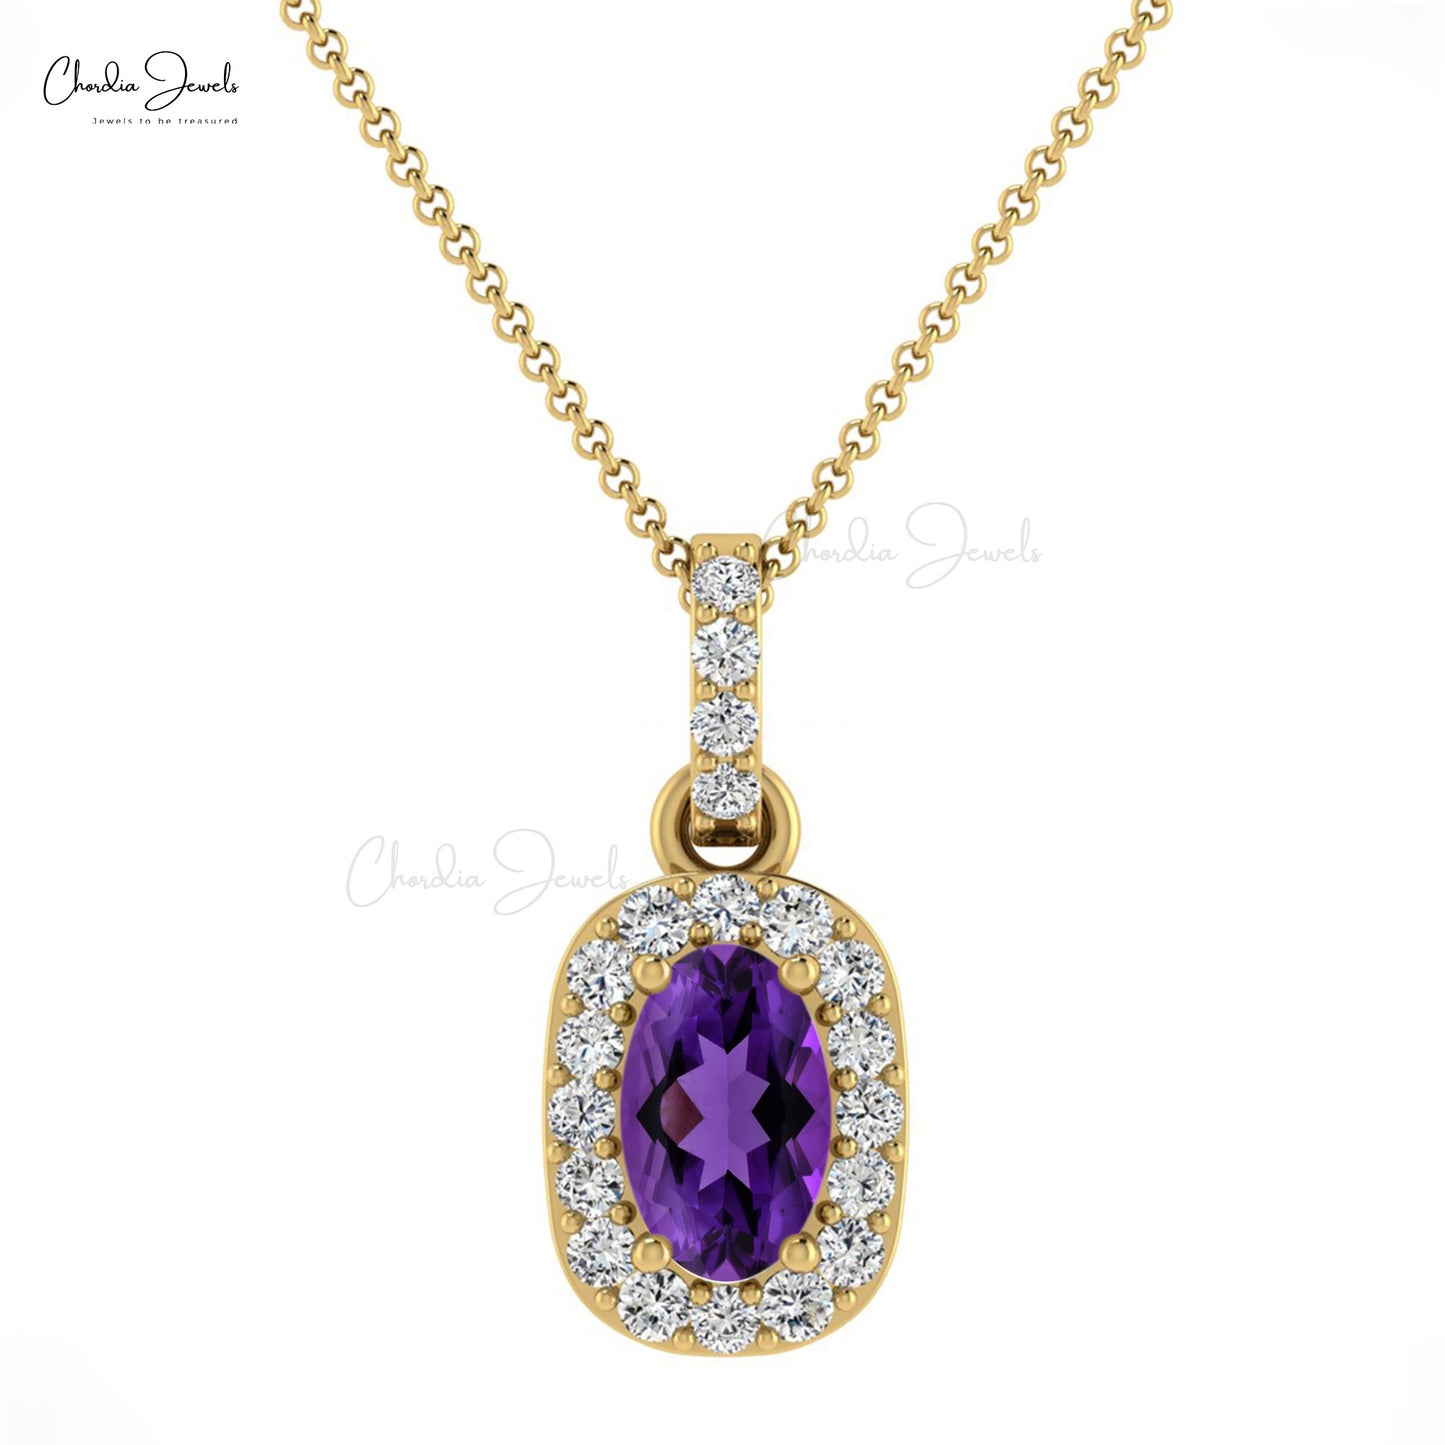 Load image into Gallery viewer, Natural Amethyst Pendant, 14k Solid Gold 7x5mm Gemstone Halo Pendant, February Birthstone Pendant Gift for Her
